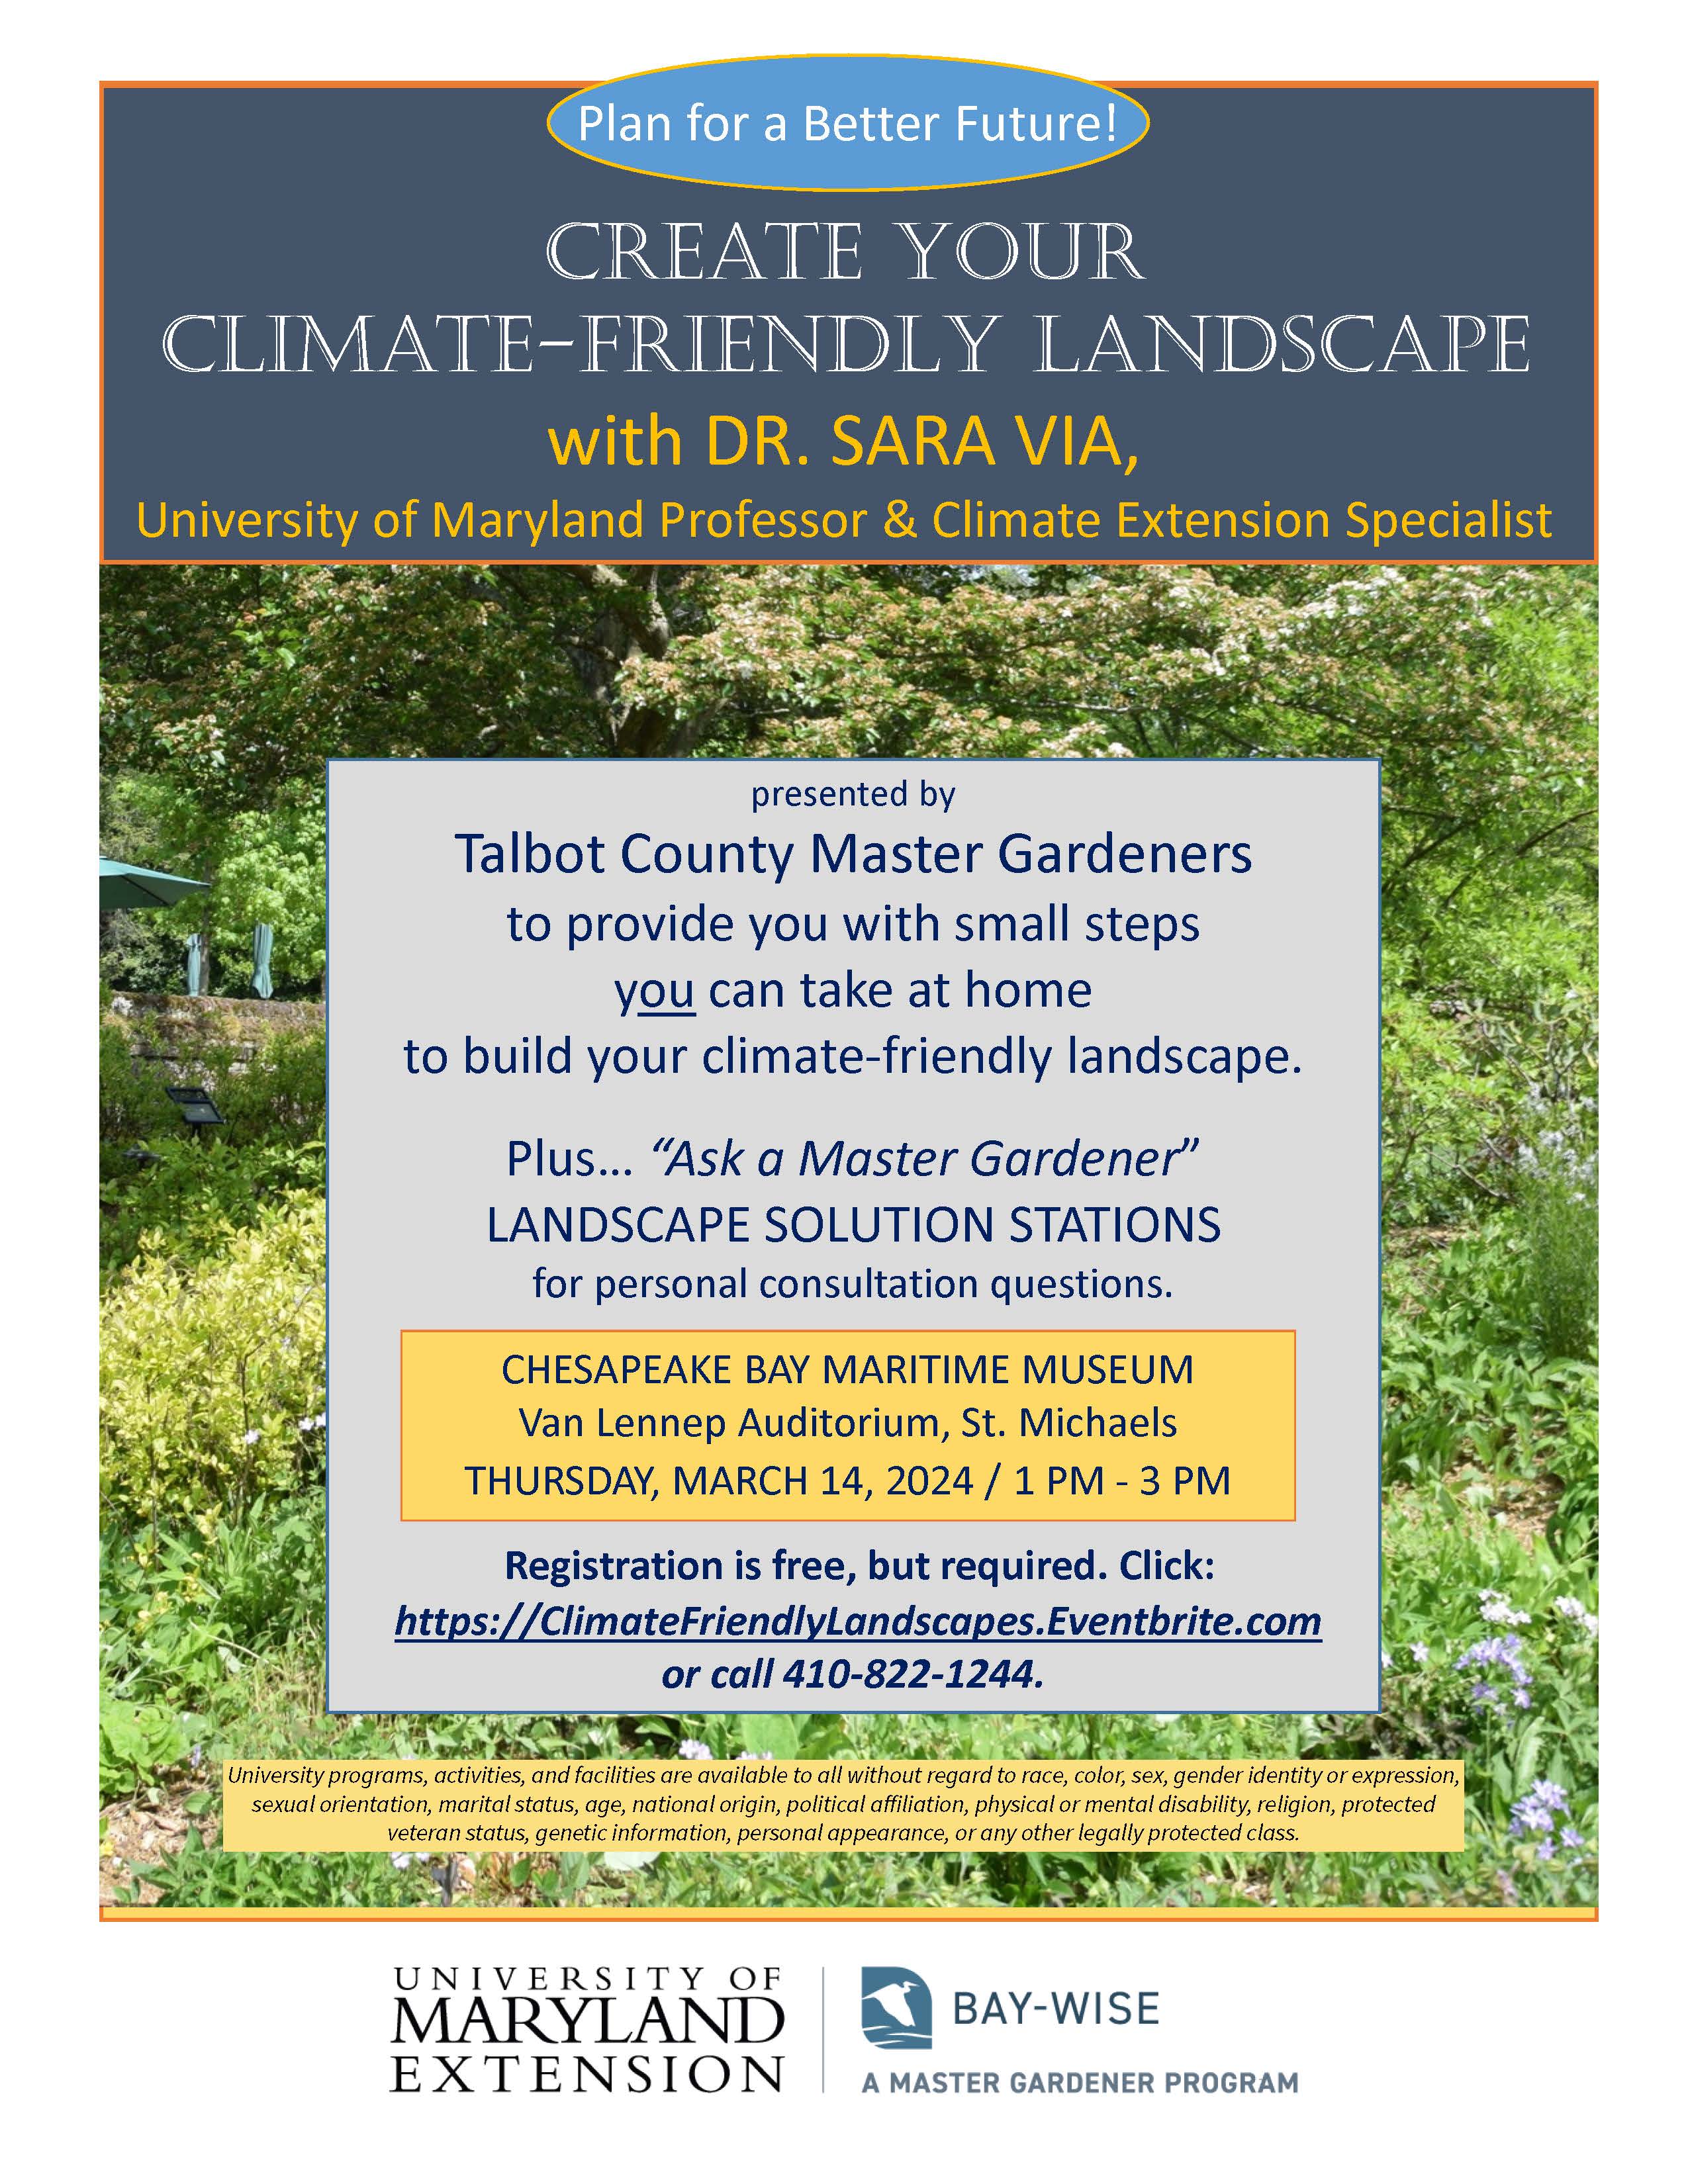 Poster with details about the event to Create Your Climate Friendly Landscape on March 14th from 1 to 3pm located at the Chesapeake Bay Maritime Museum.